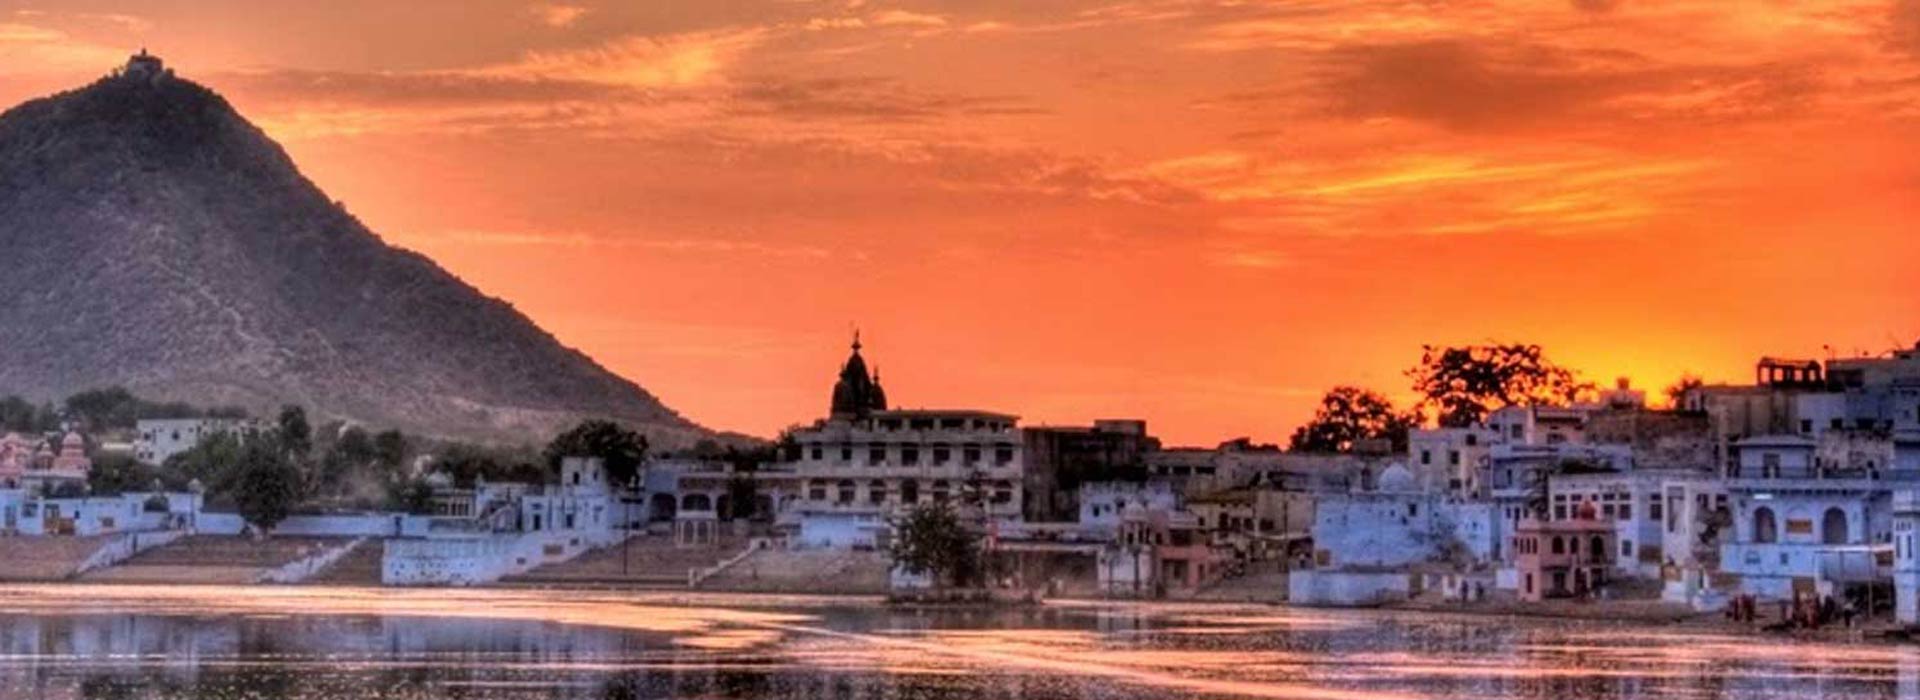 golden-triangle-tour-with-ajmer